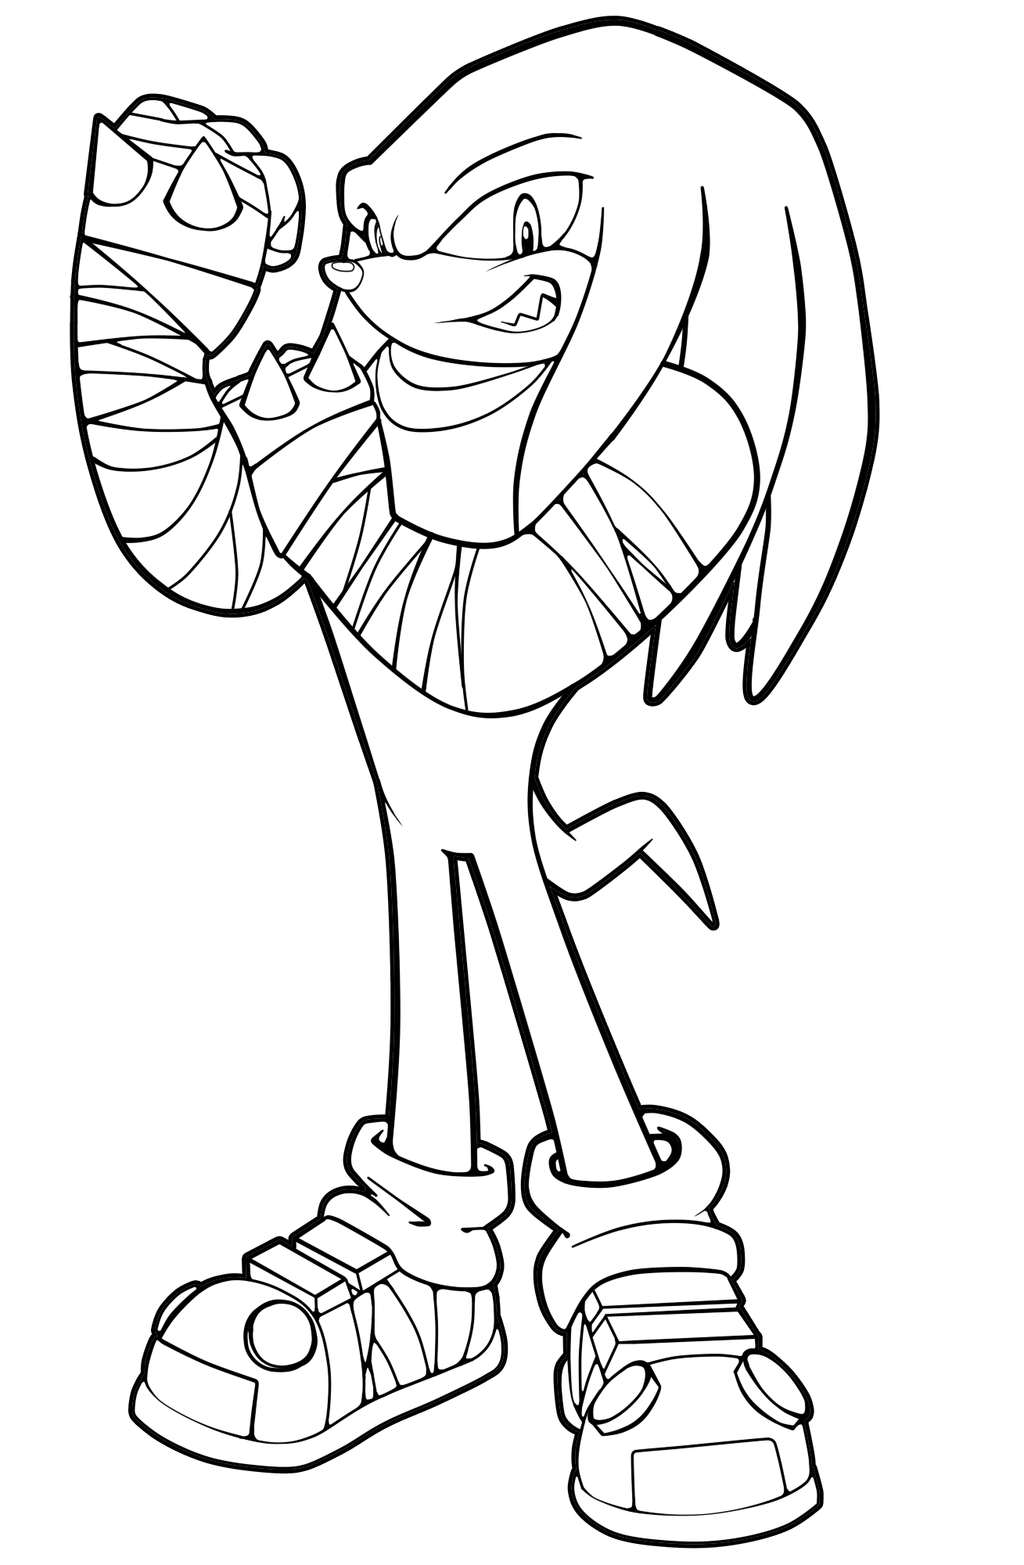 Silver The Hedgehog Coloring Pages: Sonic Style Coloring Pages ...